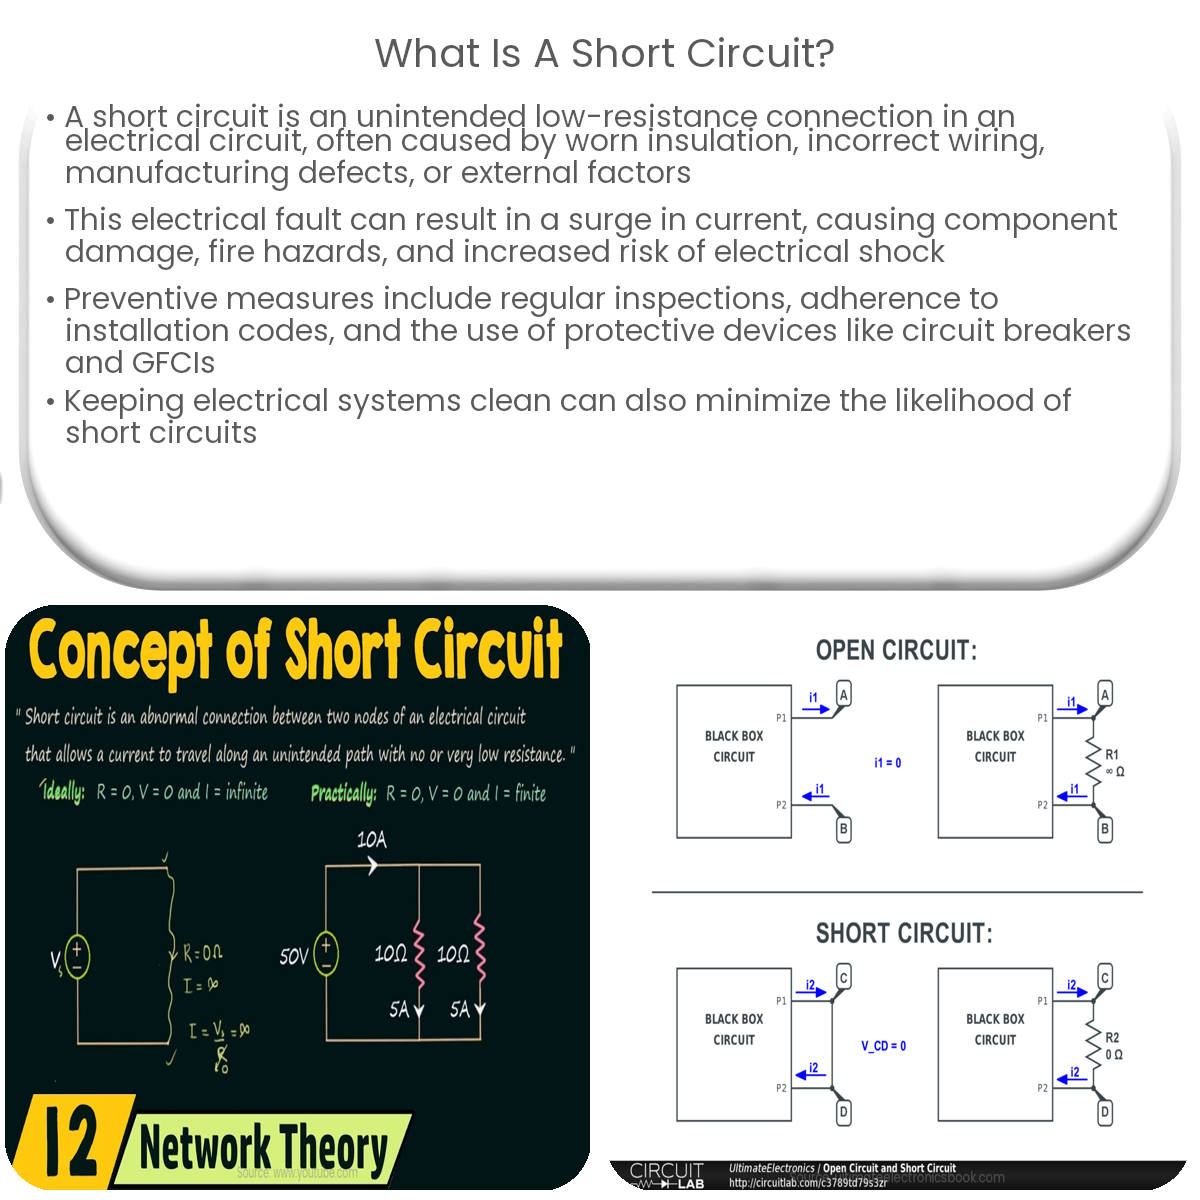 https://www.electricity-magnetism.org/wp-content/uploads/2023/06/what-is-a-short-circuit.png